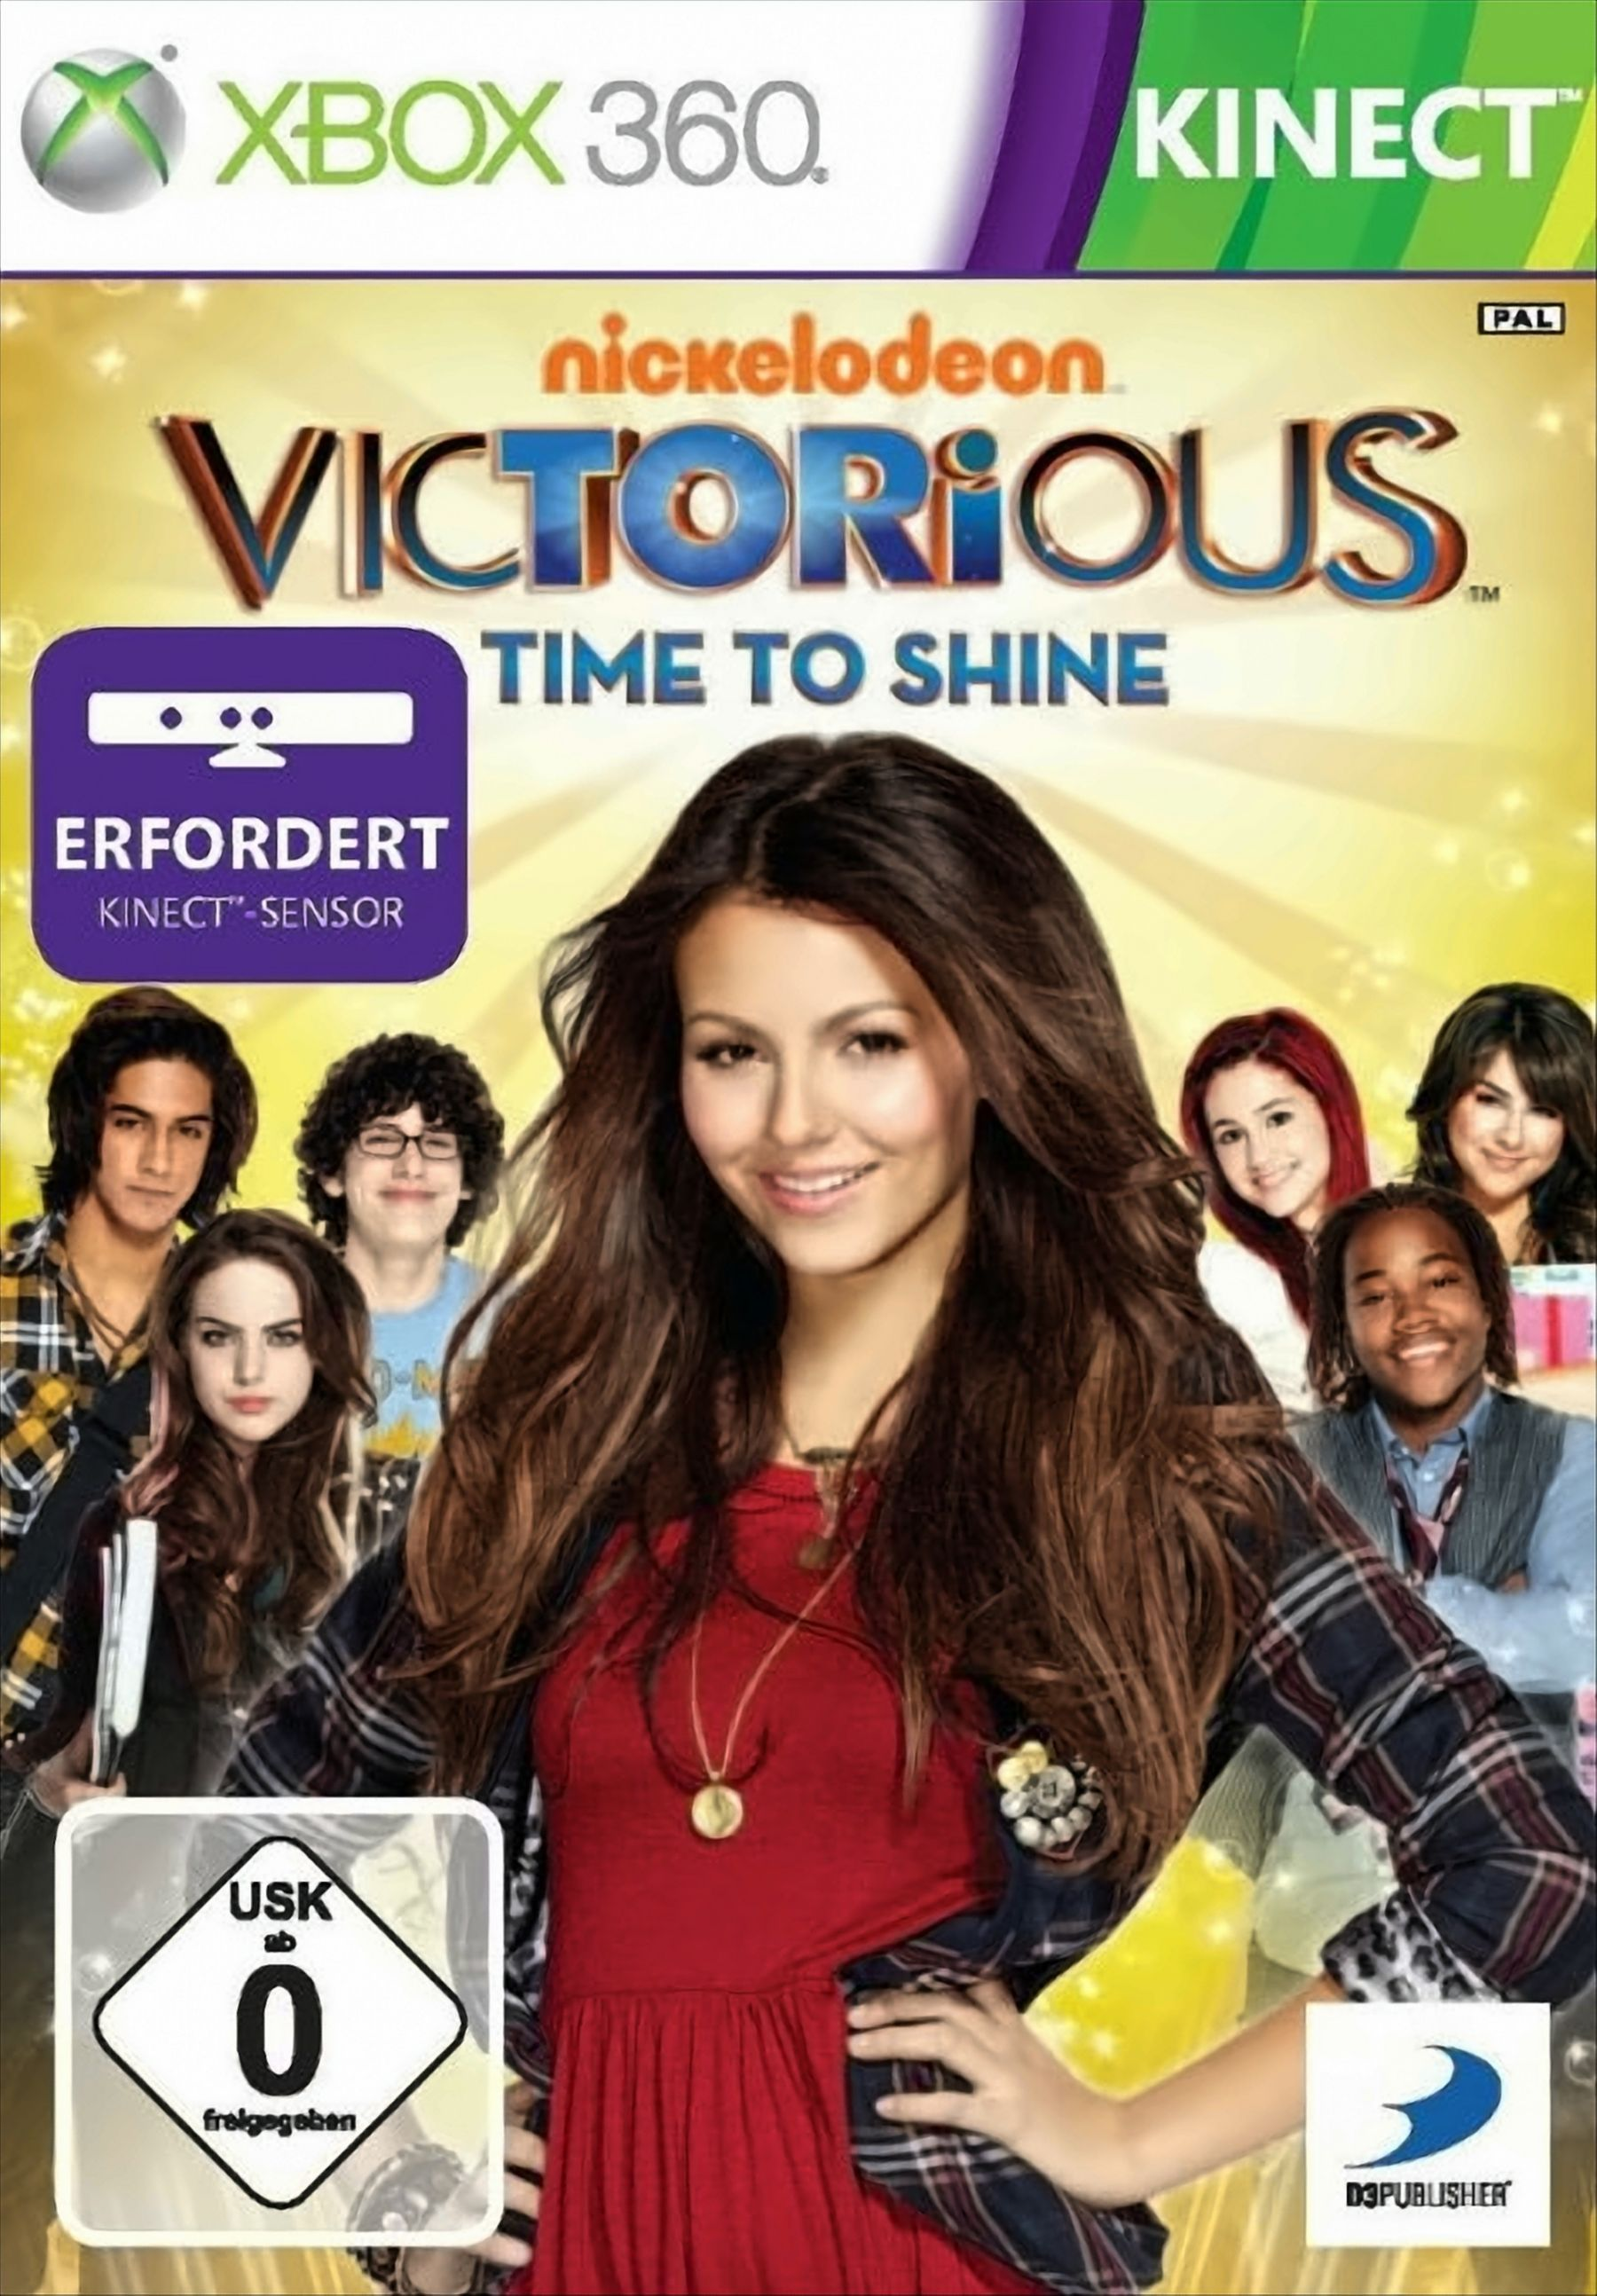 Time Victorious: 360] To [Xbox Shine -